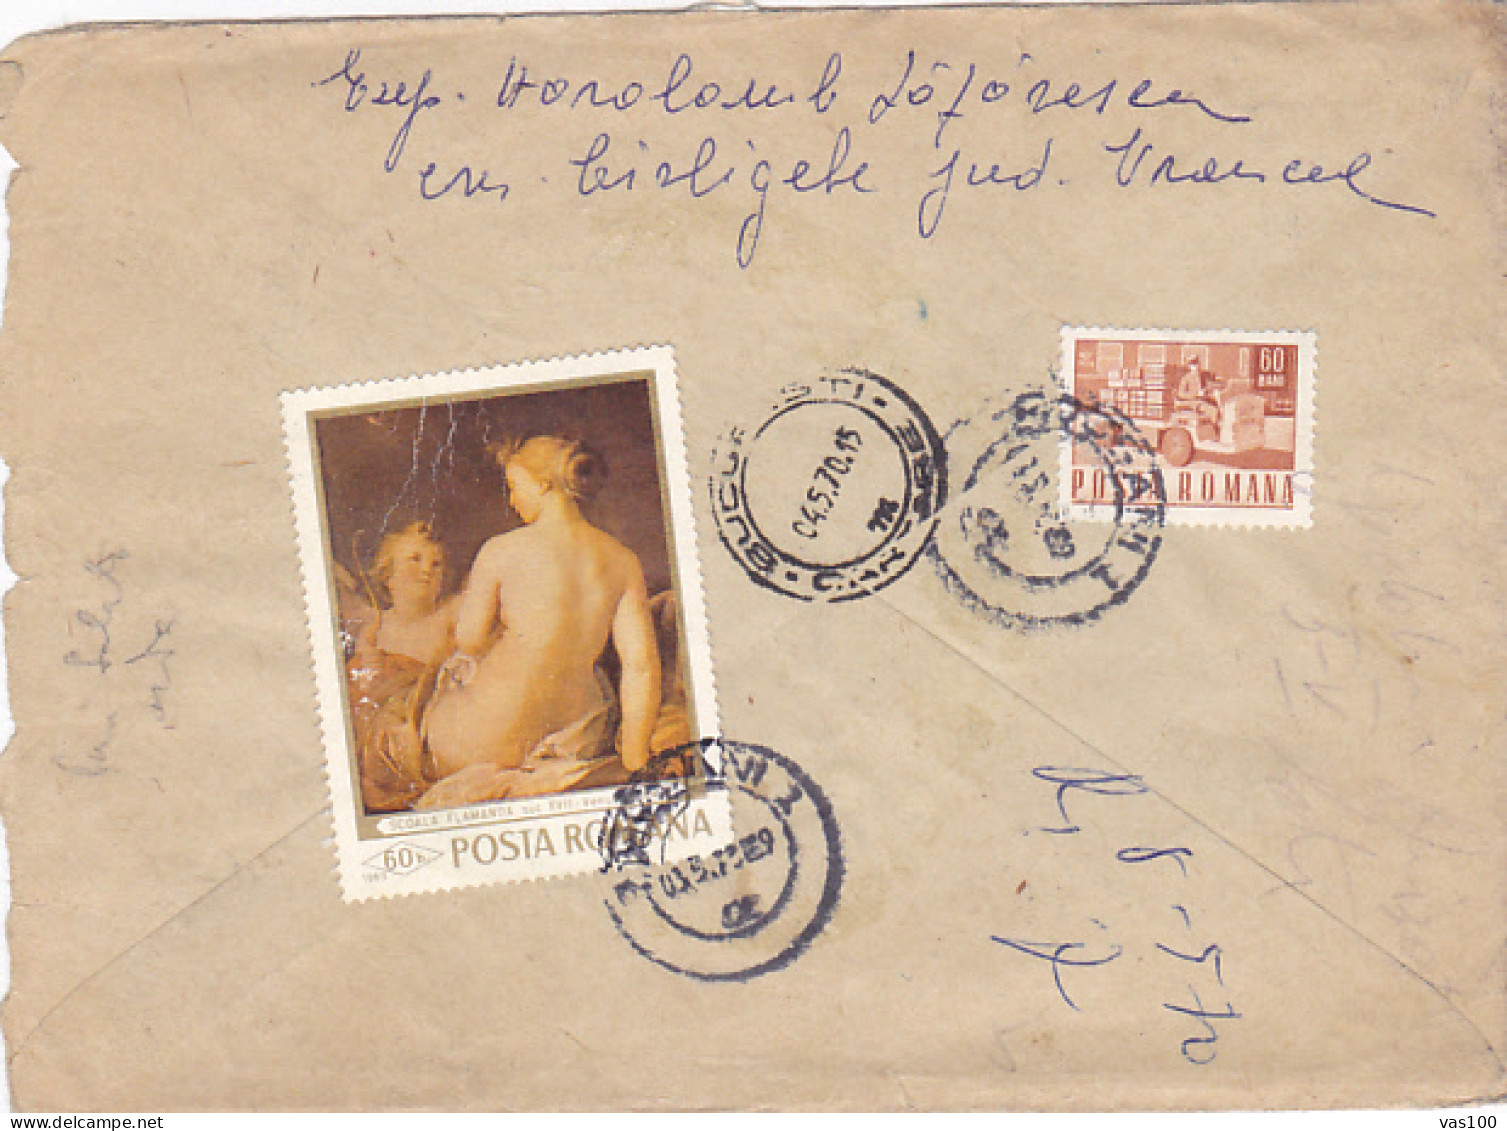 TRAIN, PLANE, POST, NUDE PAINTING, STAMPS ON REGISTERED COVER, 1970, ROMANIA - Storia Postale